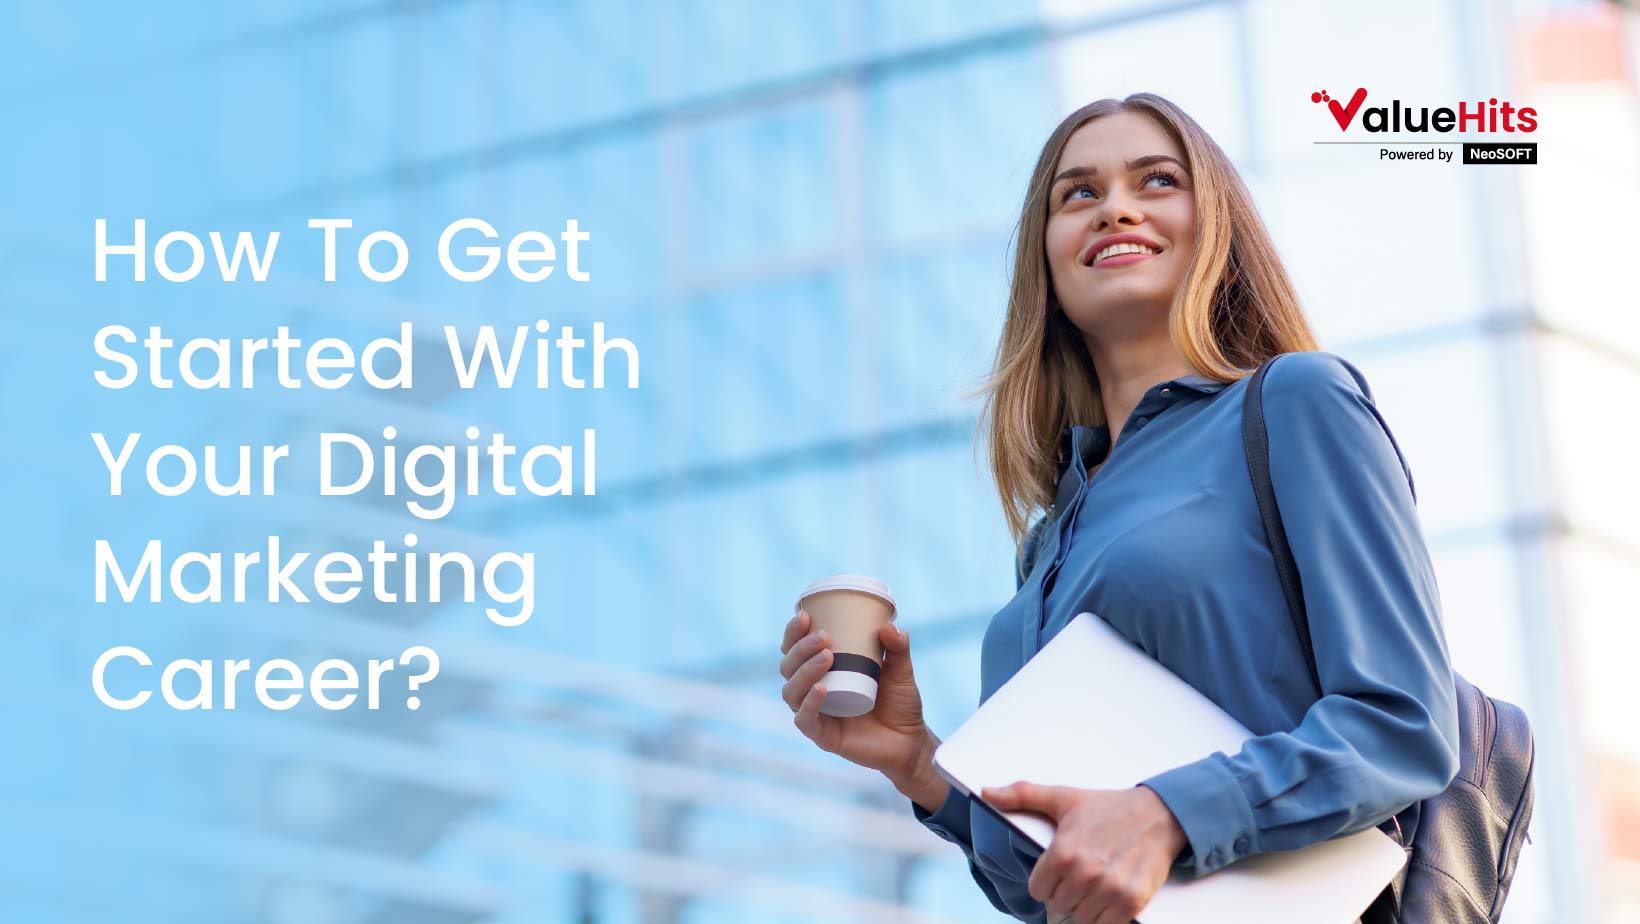 How To Get Started With Your Digital Marketing Career